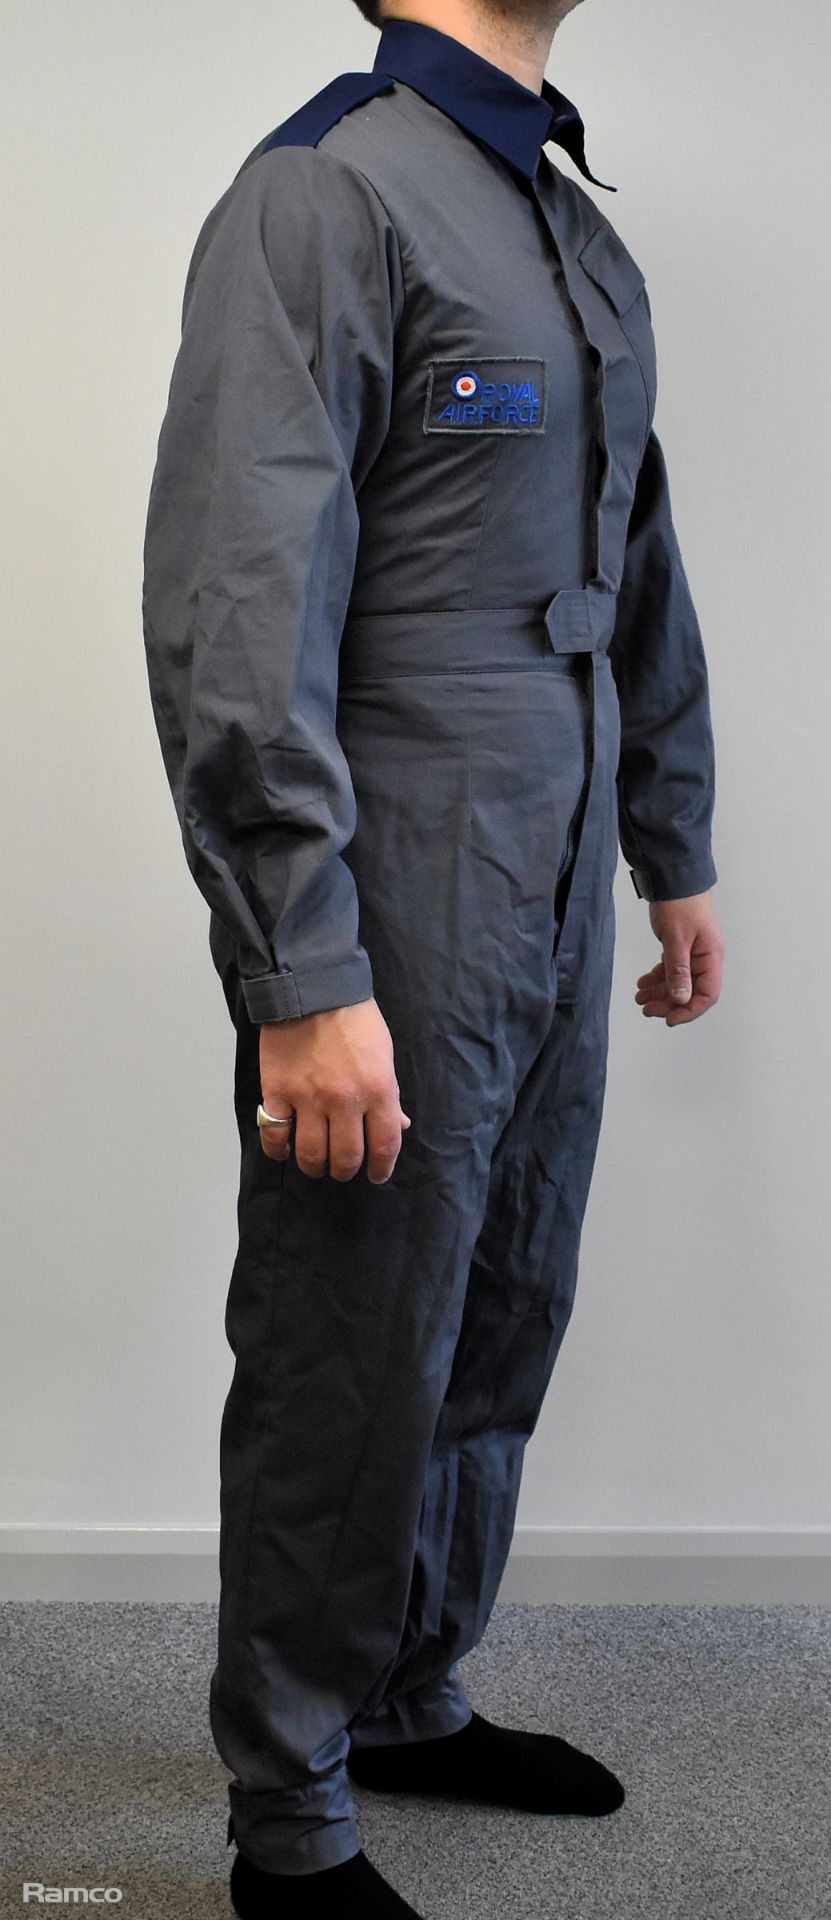 20x British Forces overalls - Blue / Grey - mixed sizes - Image 4 of 9